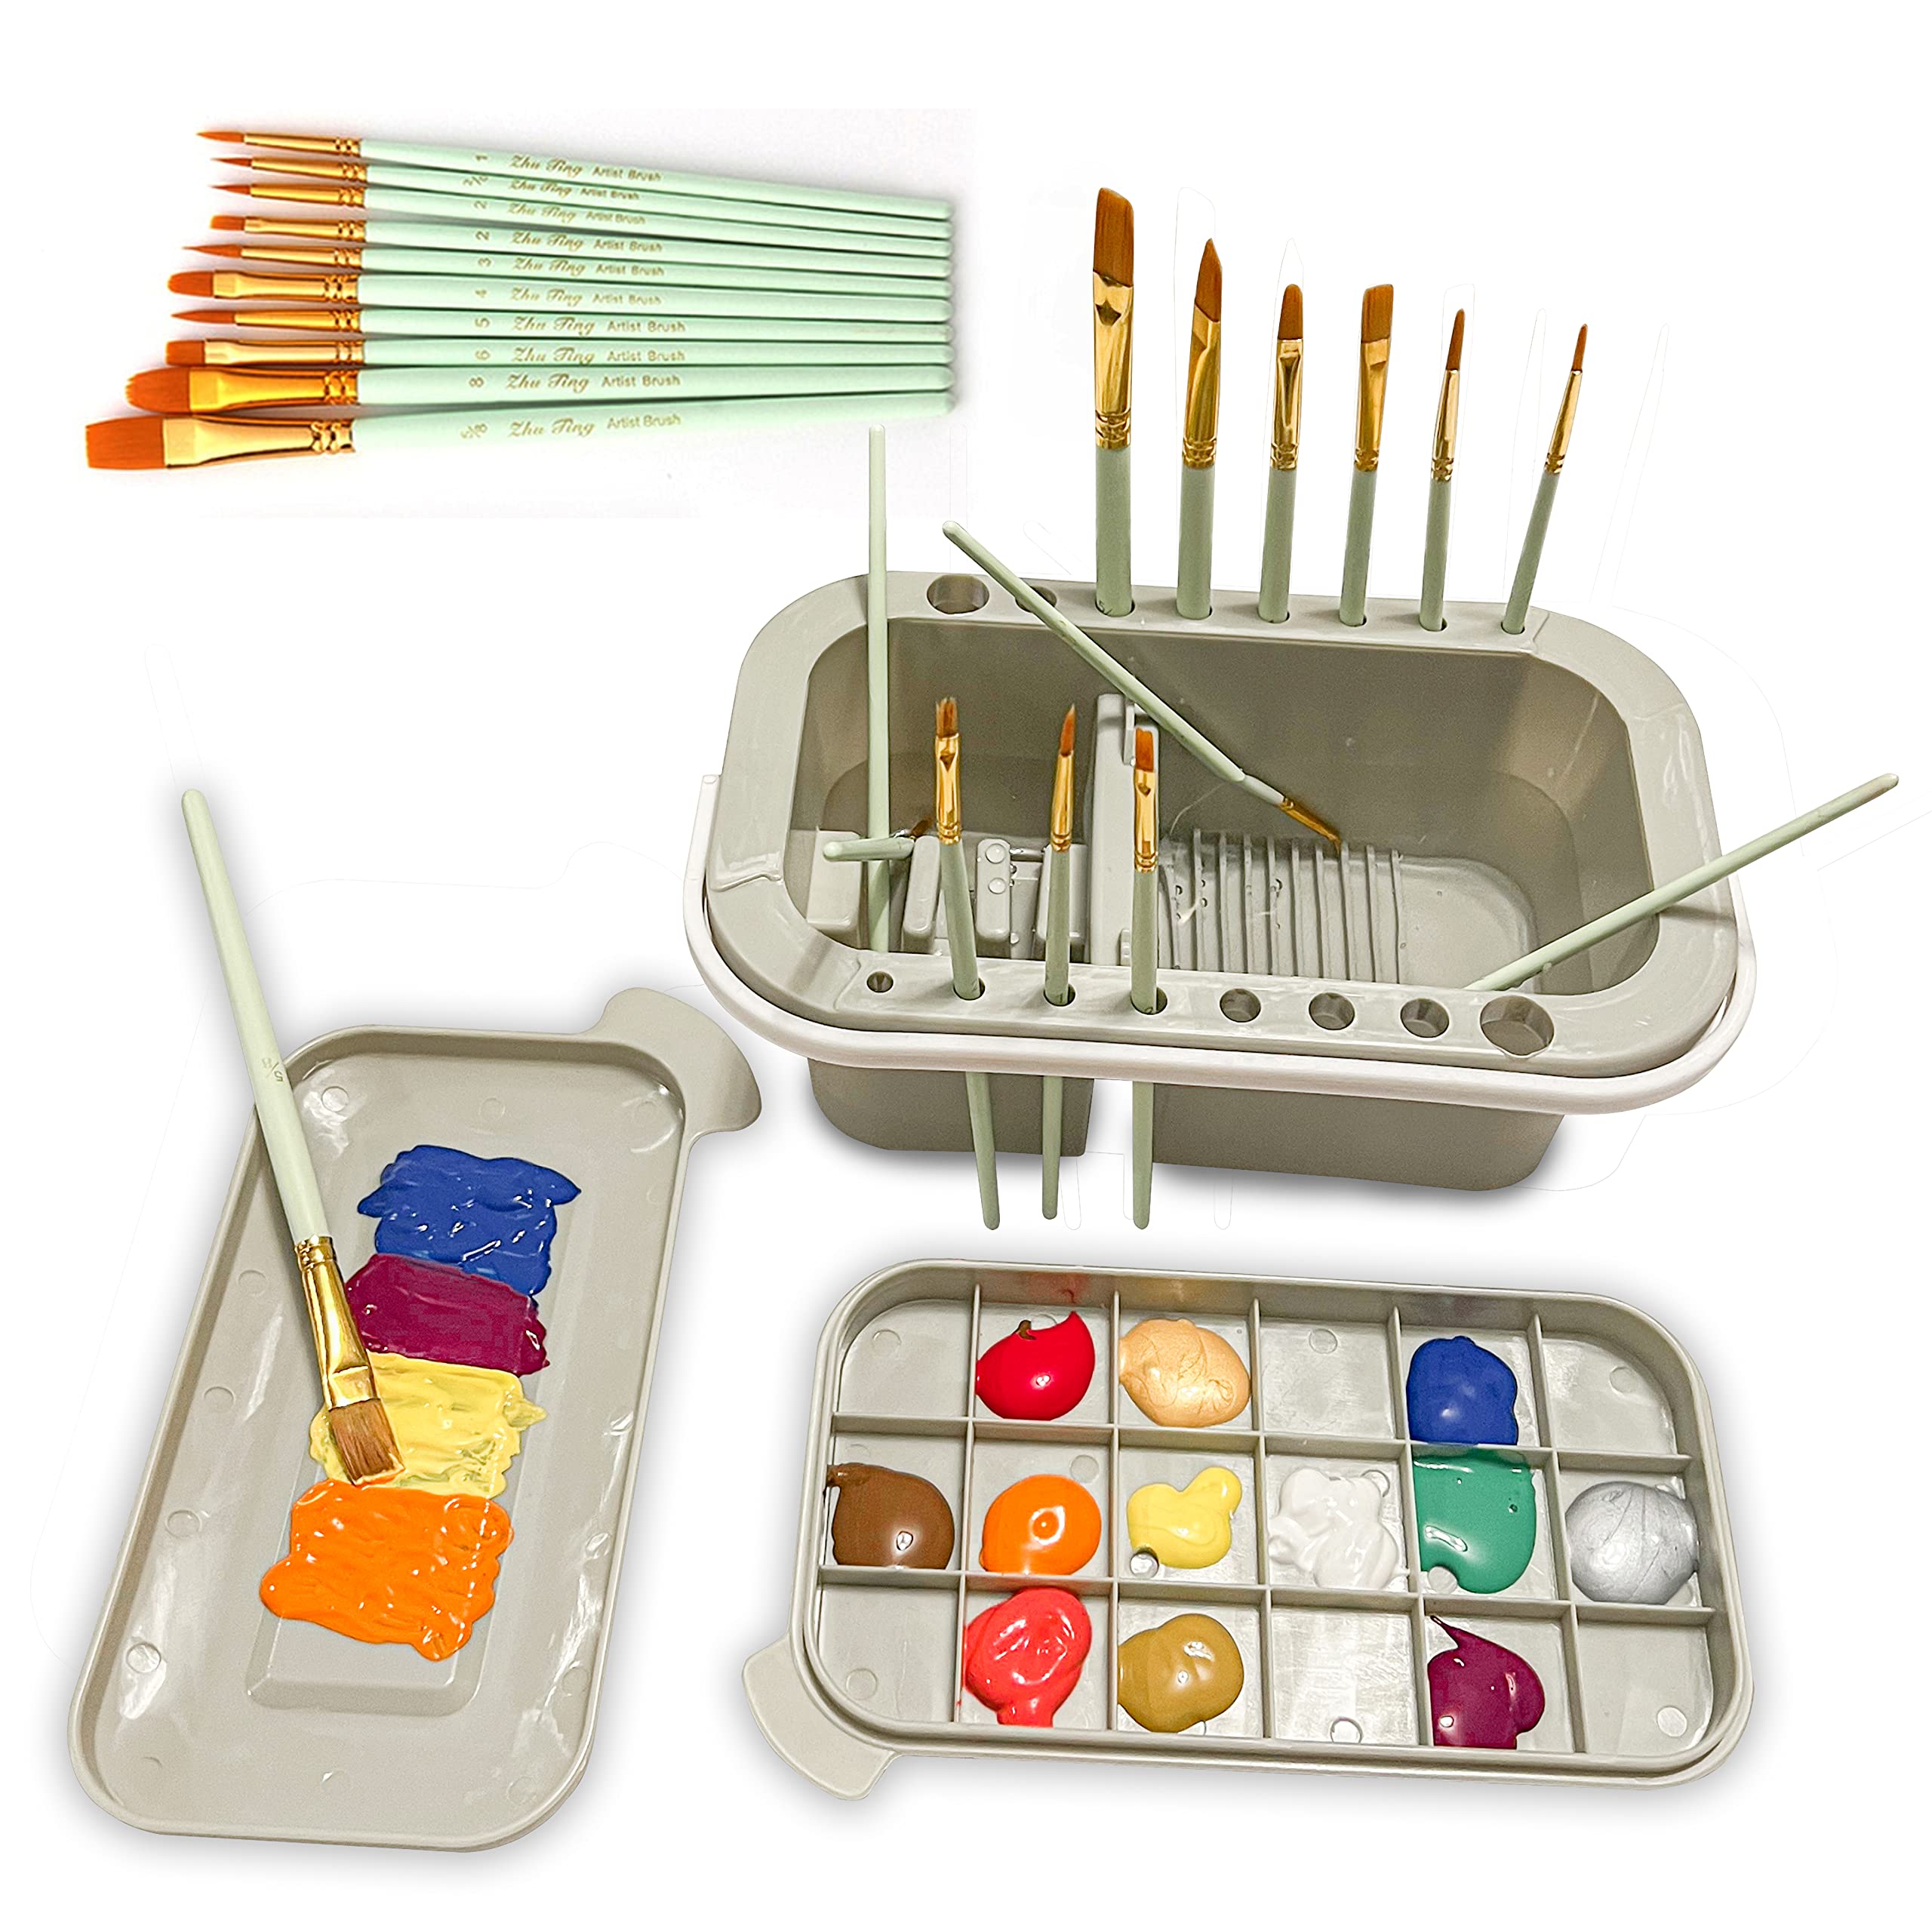 Simplify Asthetic Paint Palette - Paint Brush Cleaner with 10